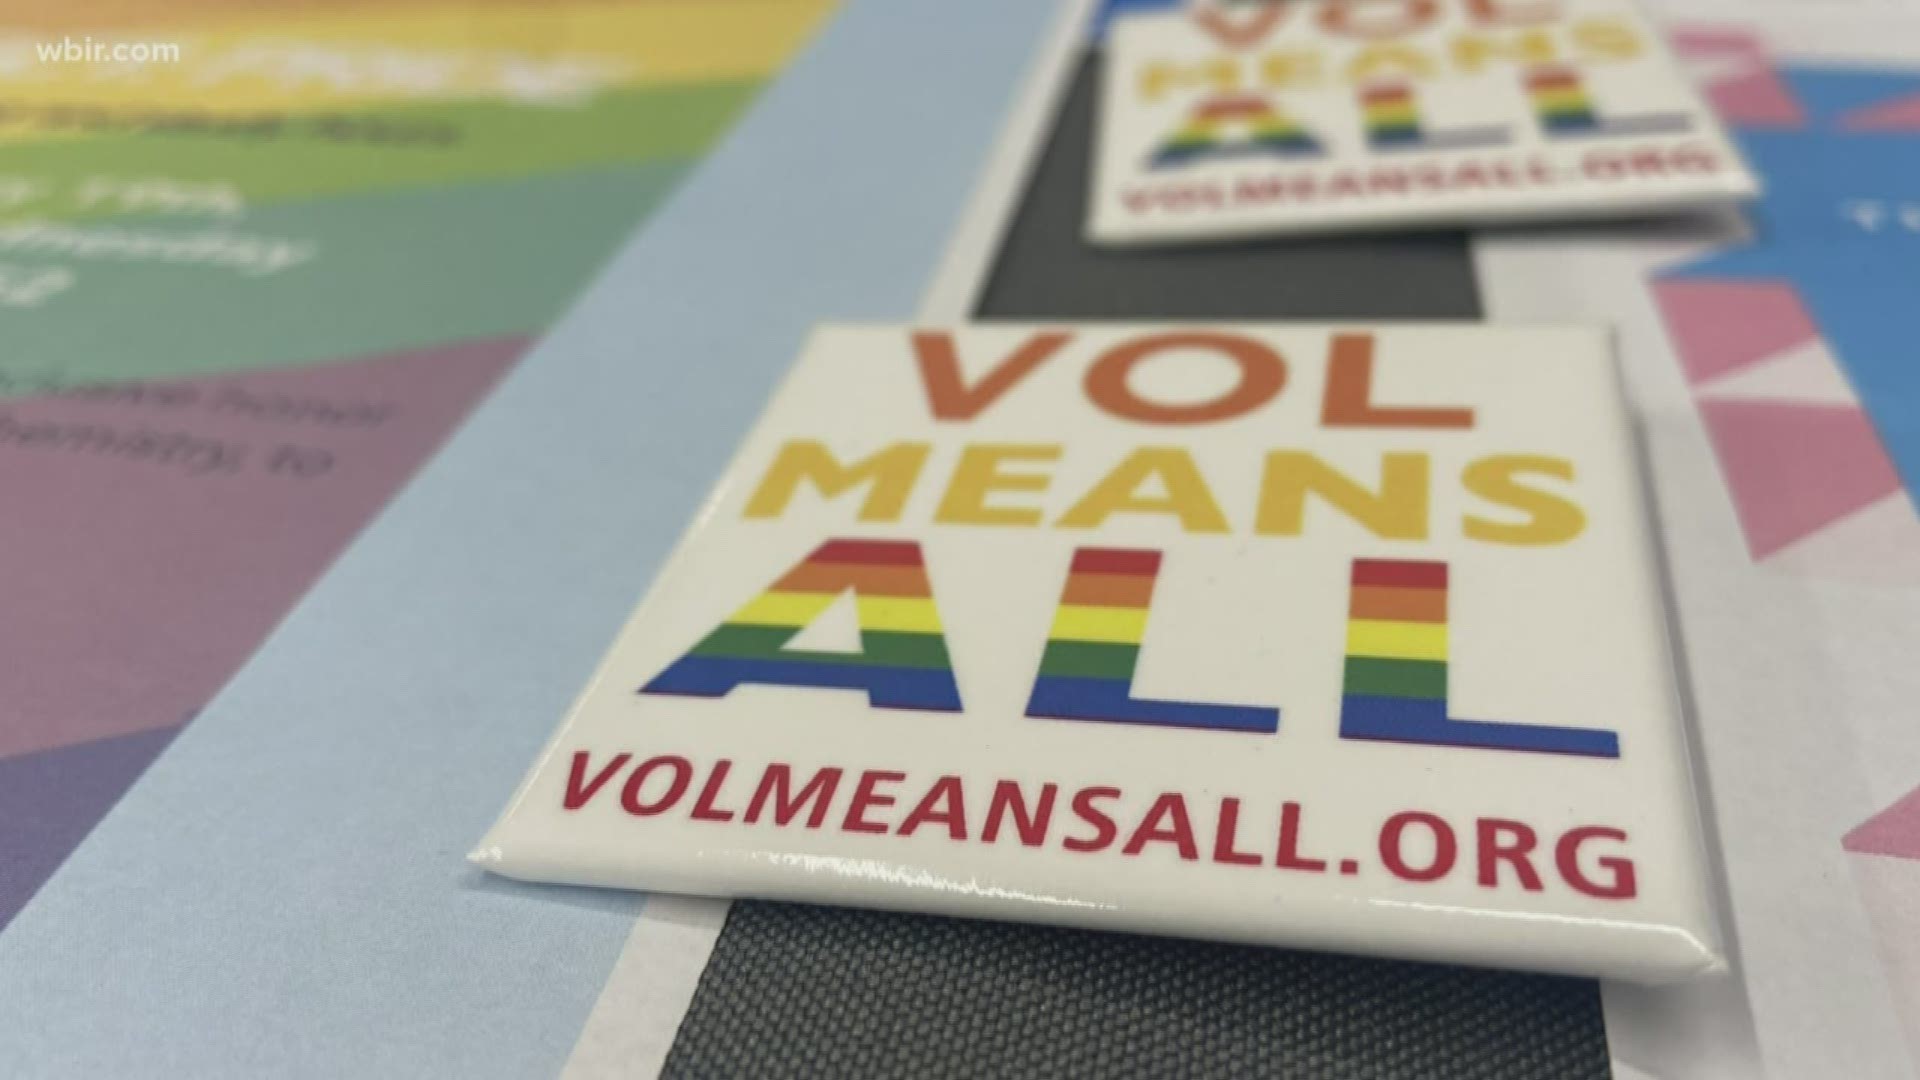 There was a panel on being black and LGBTQ+ at University of Tennessee. The organizer for the conversation says this is only the beginning of making voices are heard